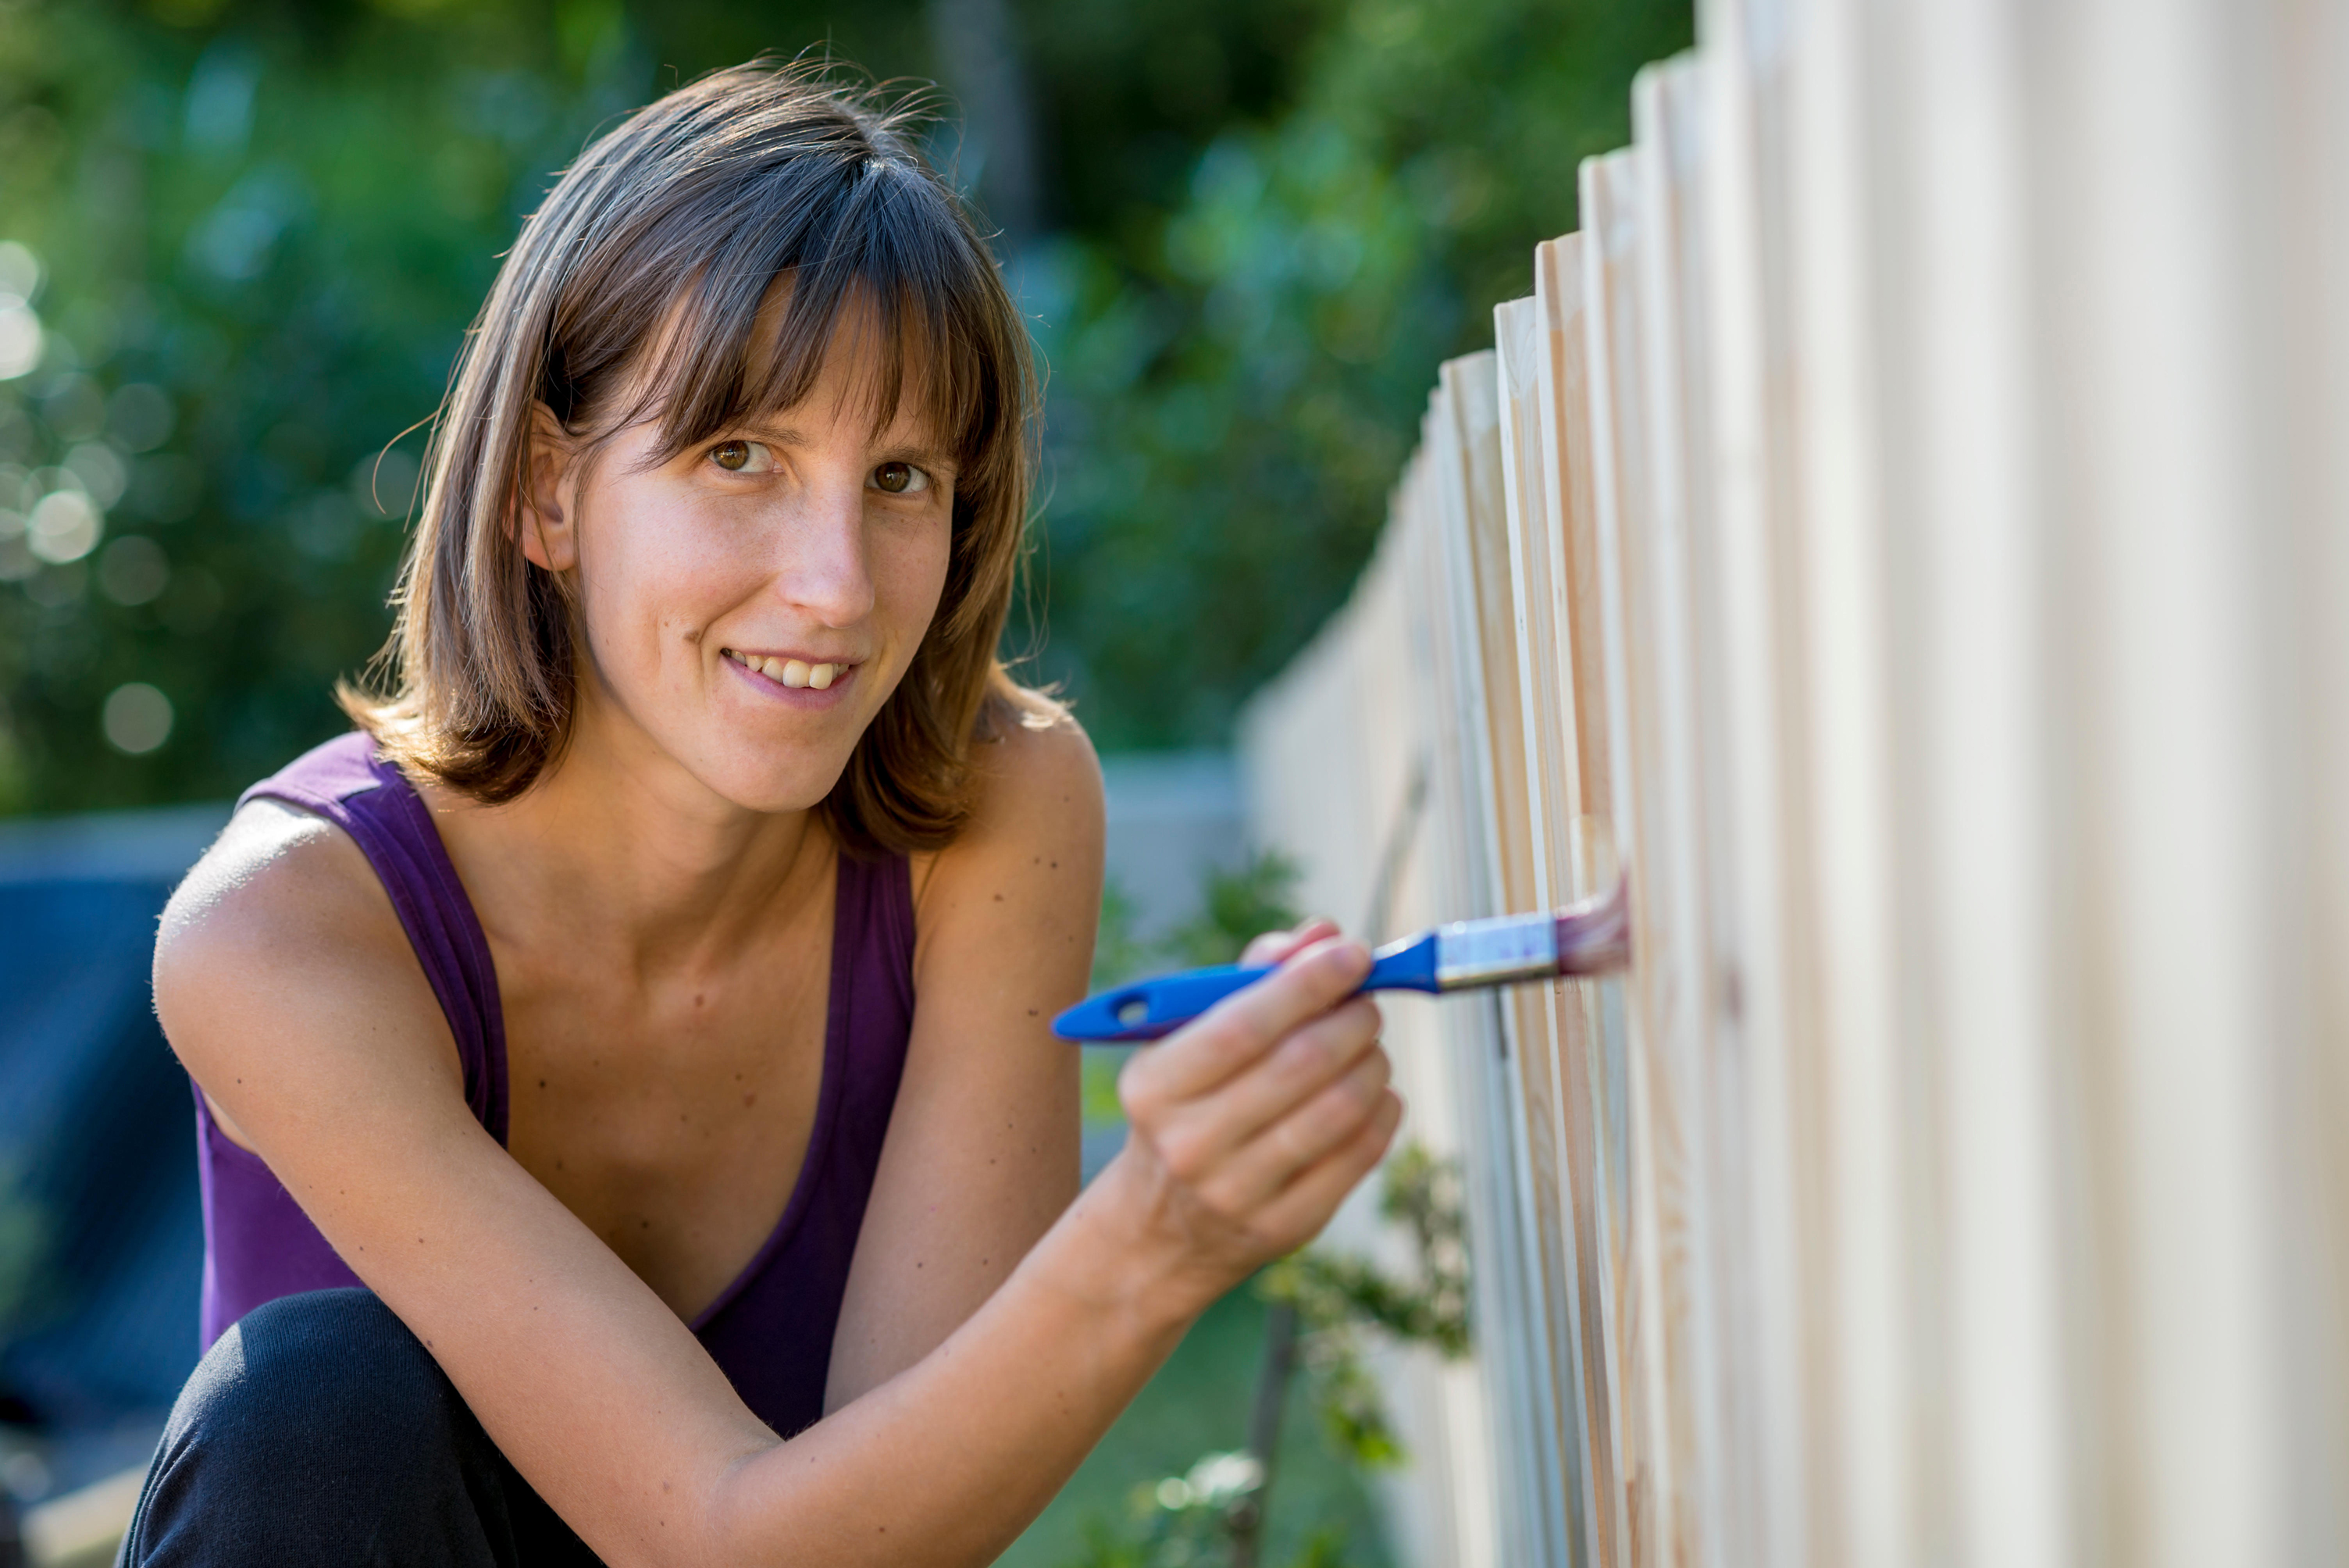 A woman painting a garden fence (Alamy/PA)